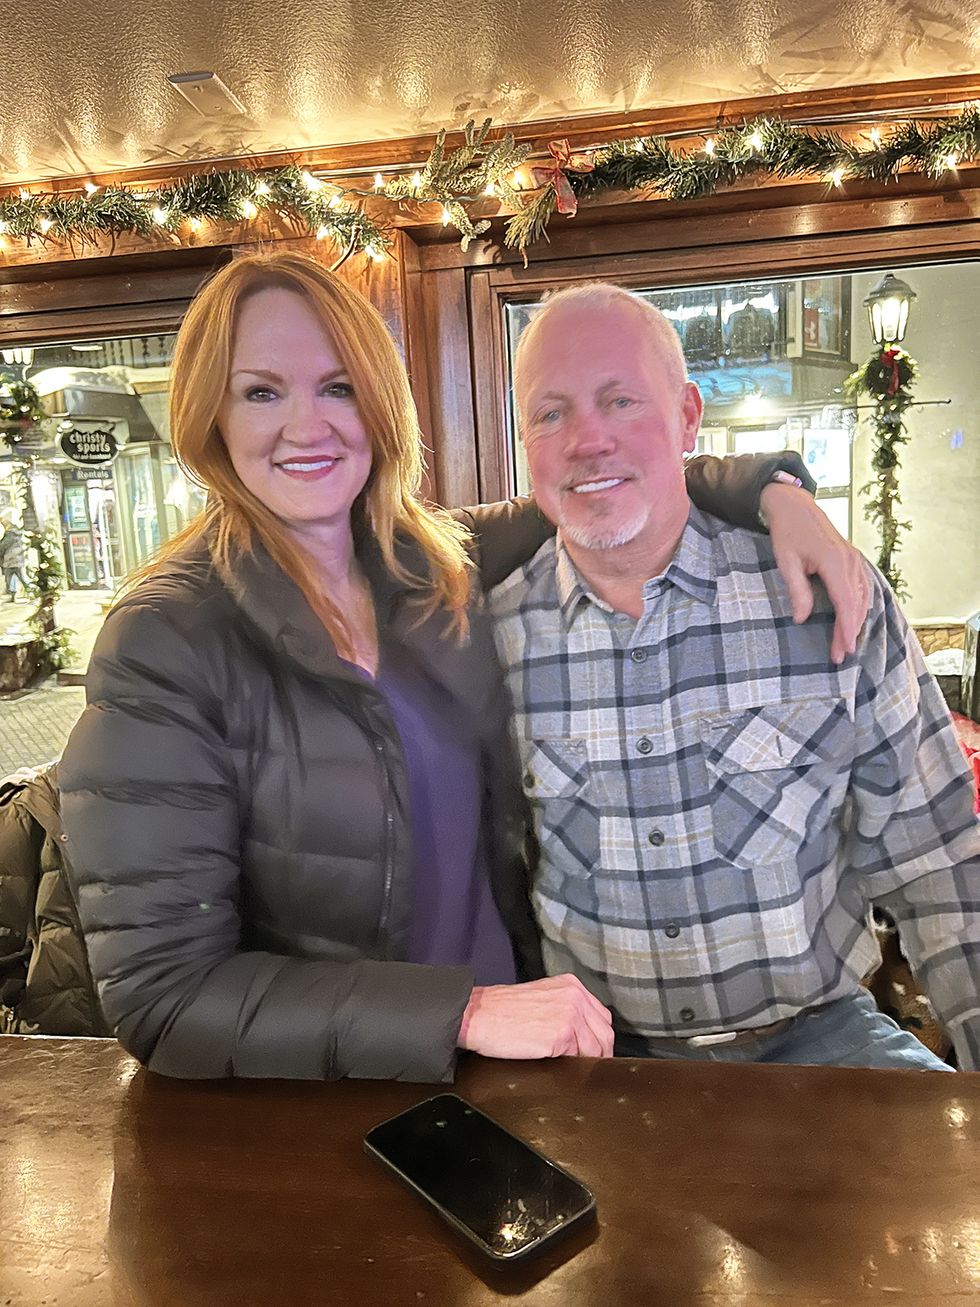 Ree Drummond and Family in Vail, Colorado for Christmas Vacation 2022